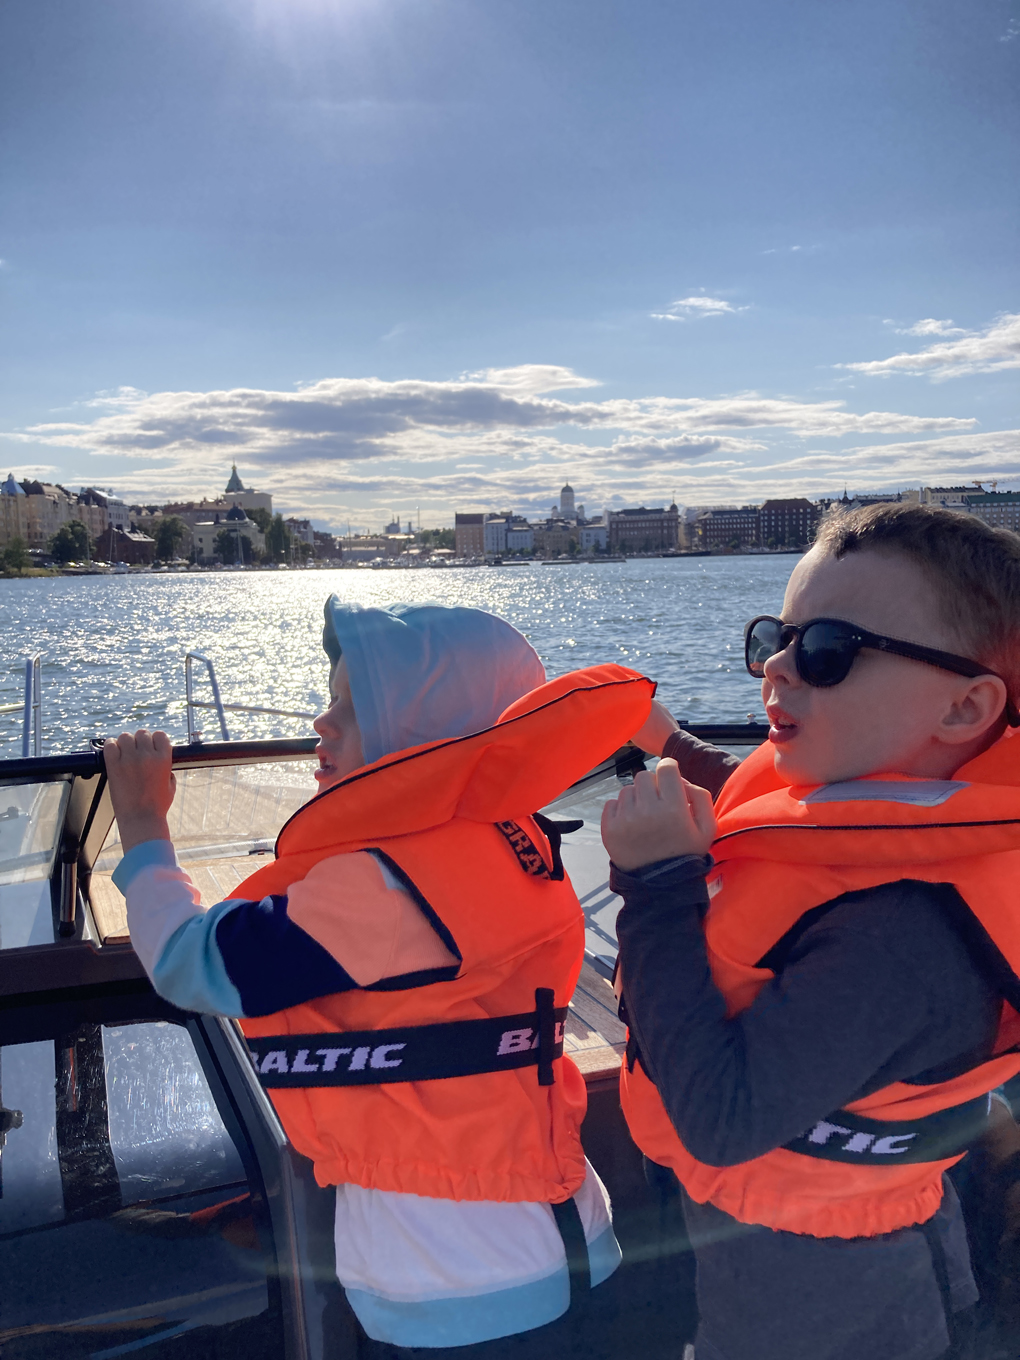 Two boys wearing life vests in a boat.